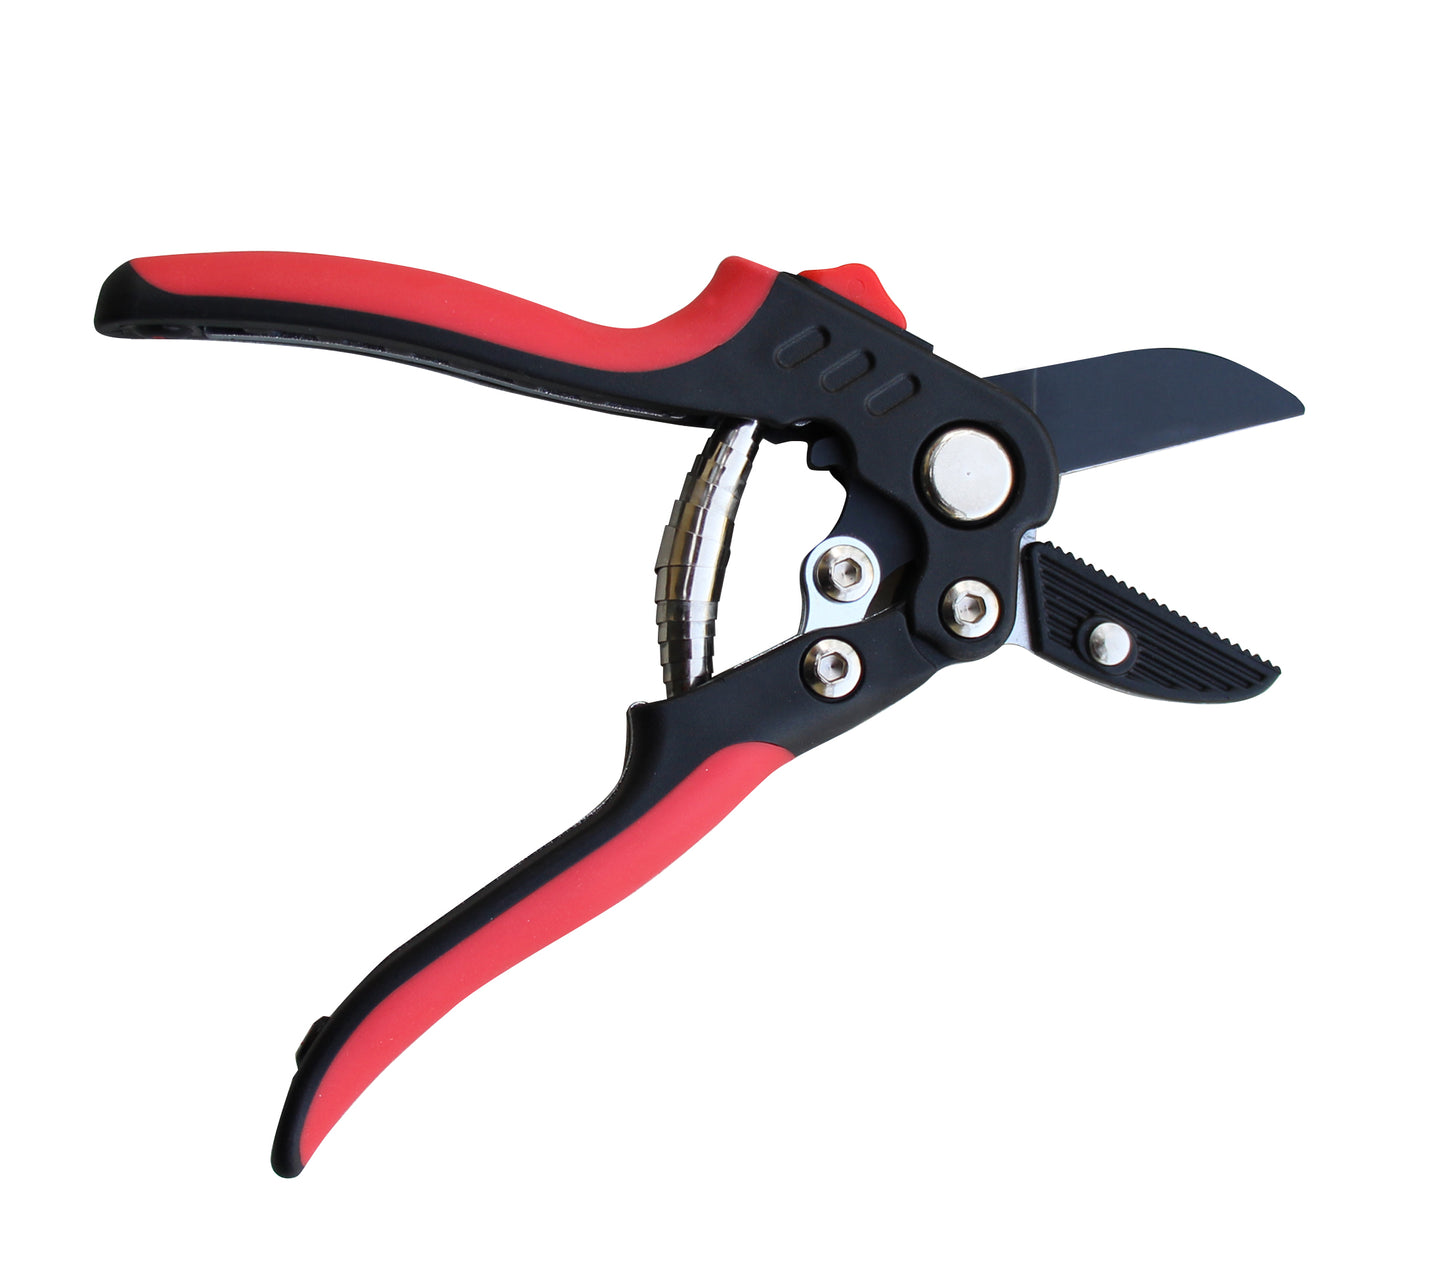 TABOR TOOLS S852A Anvil Hand Pruner with Compound Action